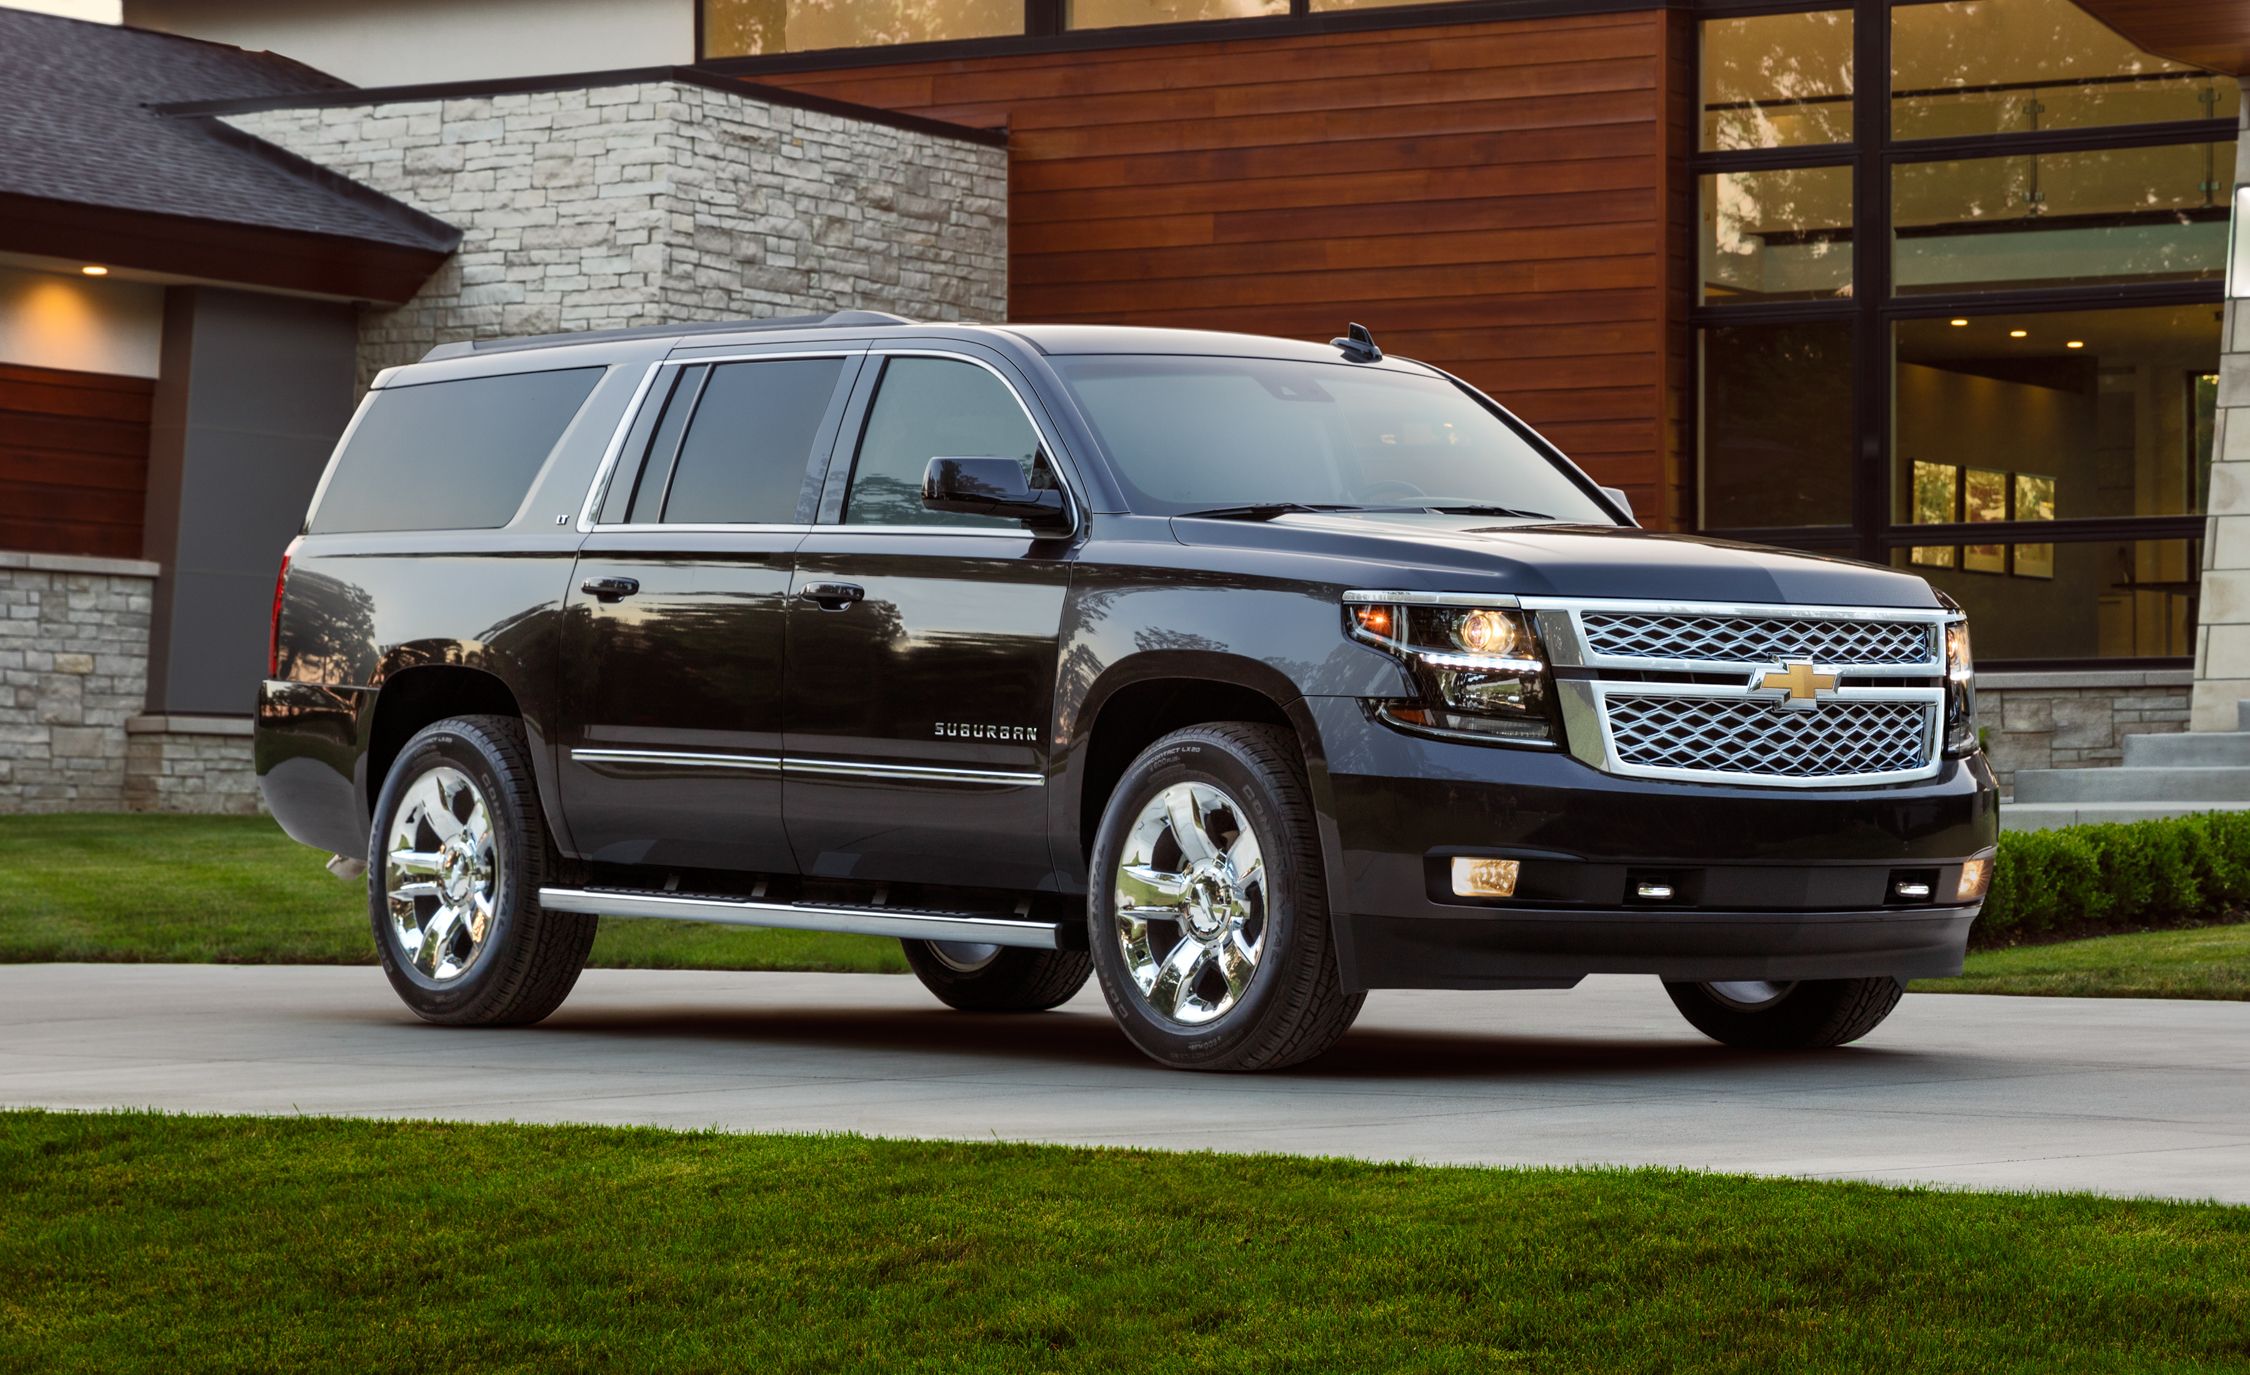 2018 Chevrolet Suburban Review Pricing